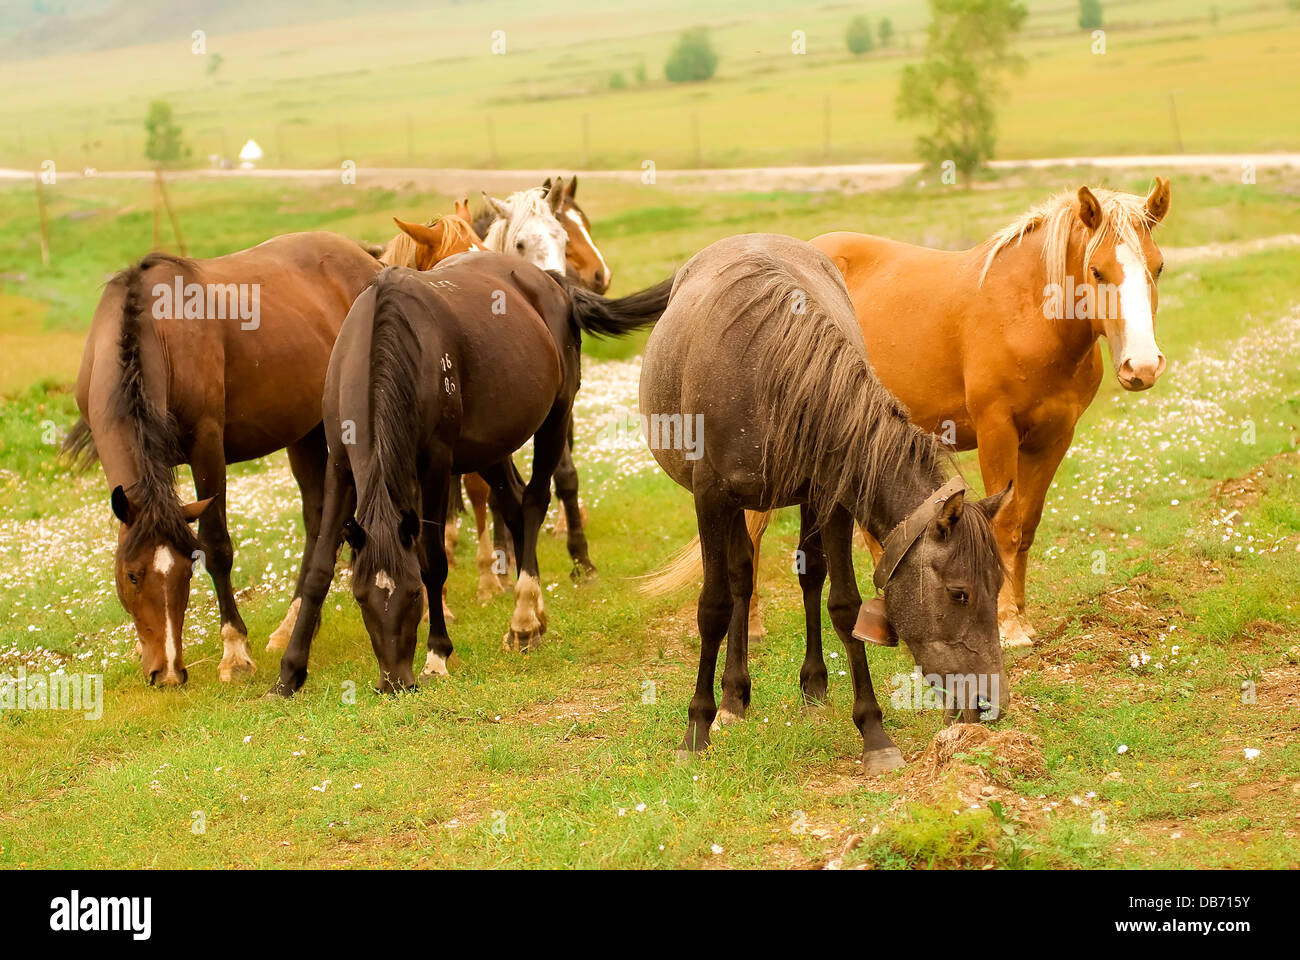 Horses grazing in a field Stock Photo